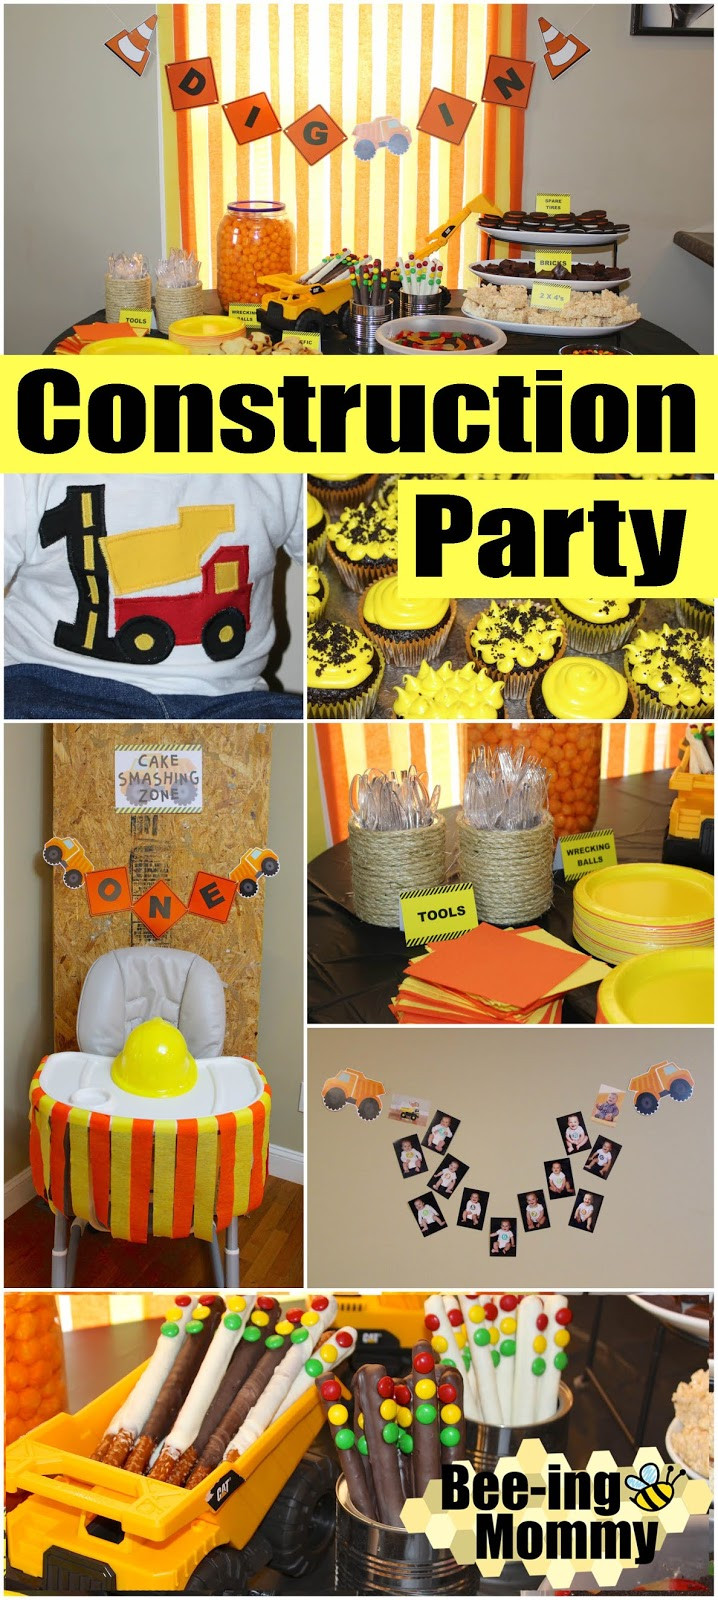 Construction Birthday Party Decorations
 Construction Birthday Party